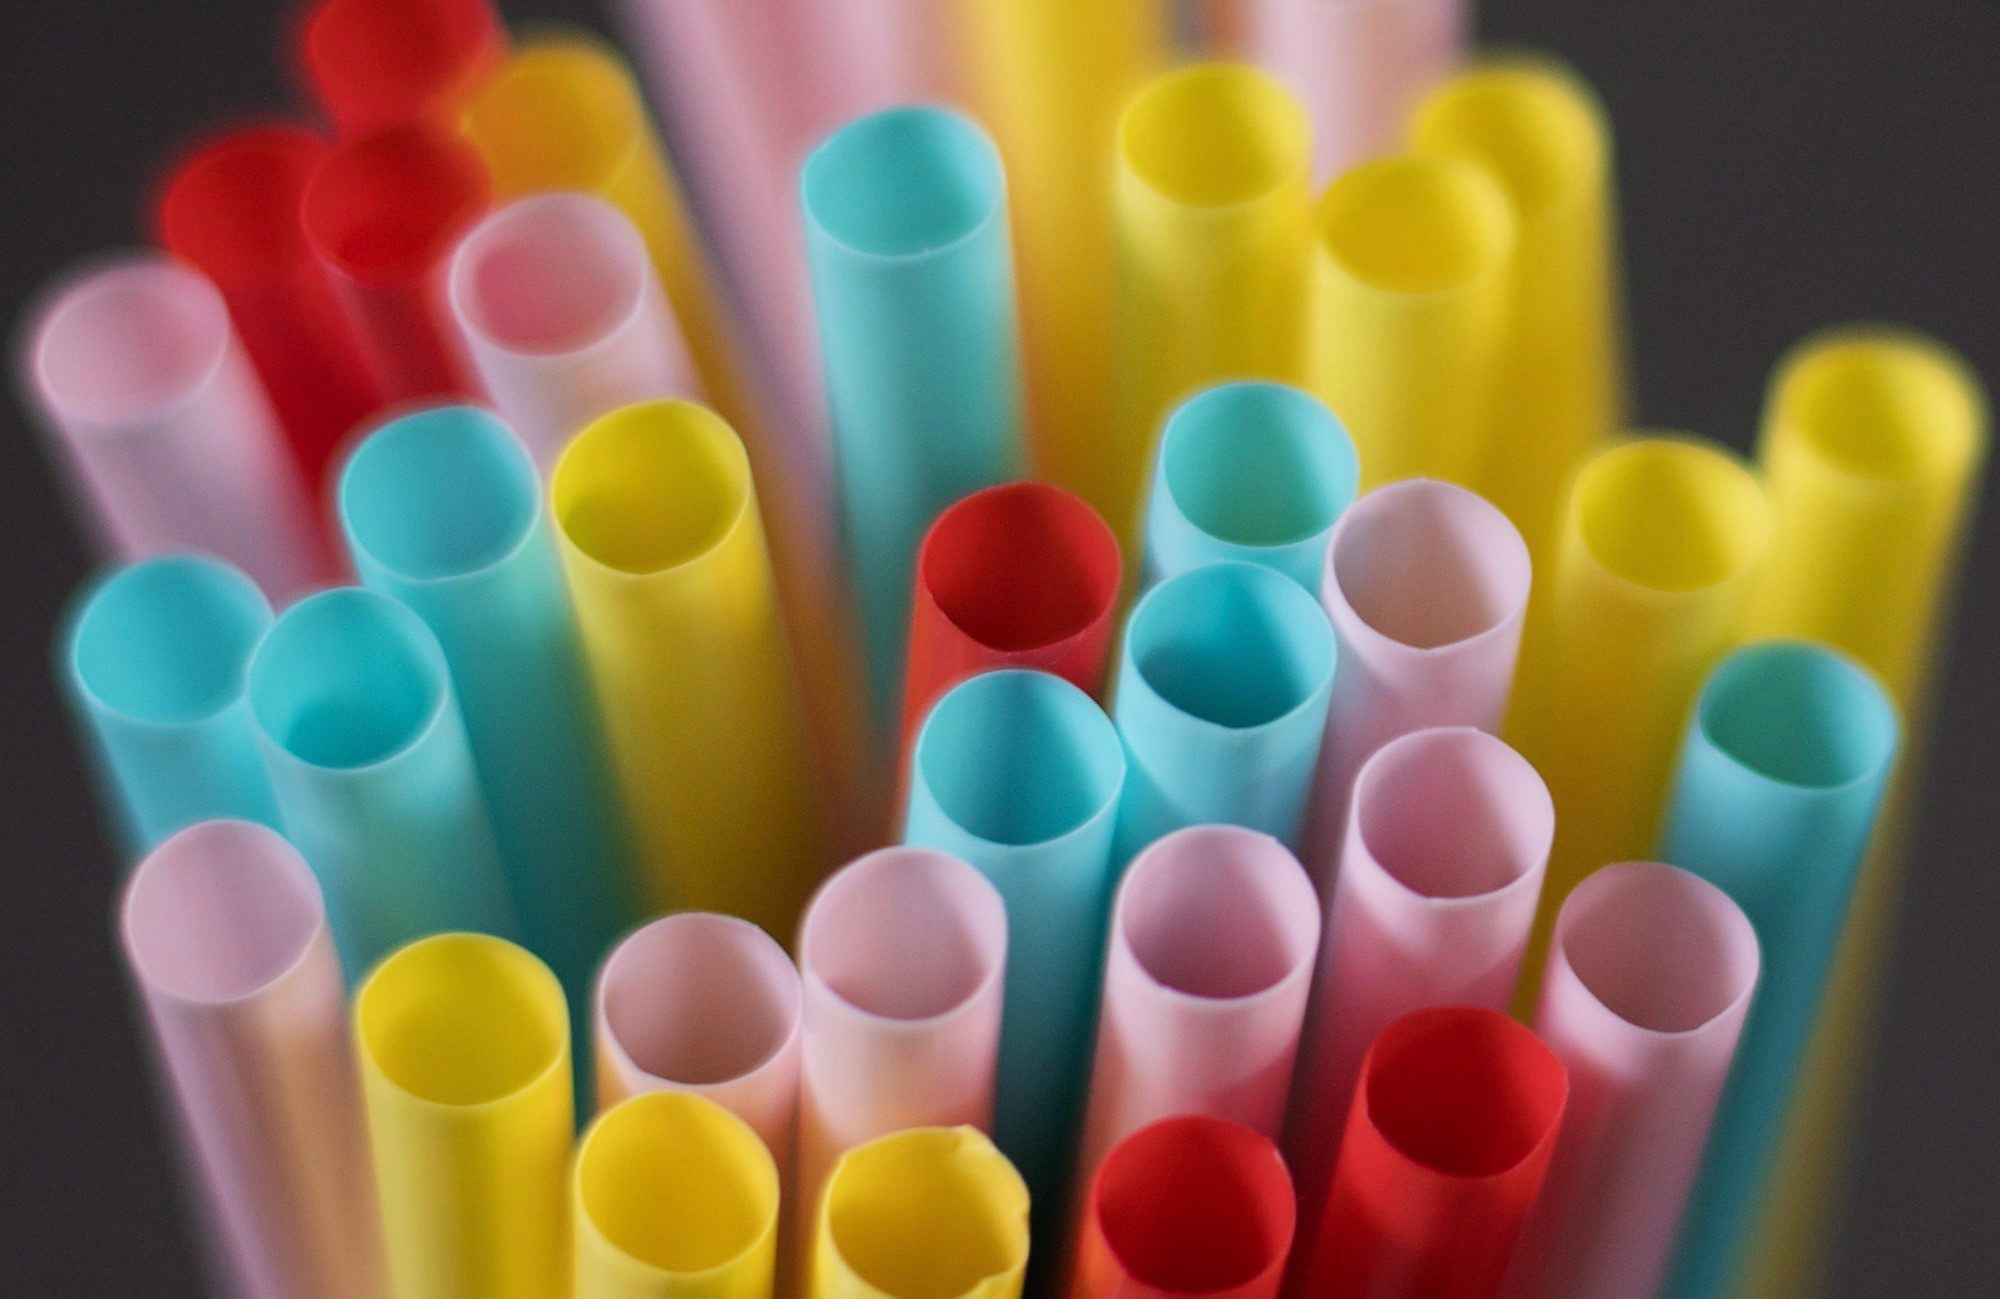 Canada plans to ban 'harmful' single-use plastics by 2021